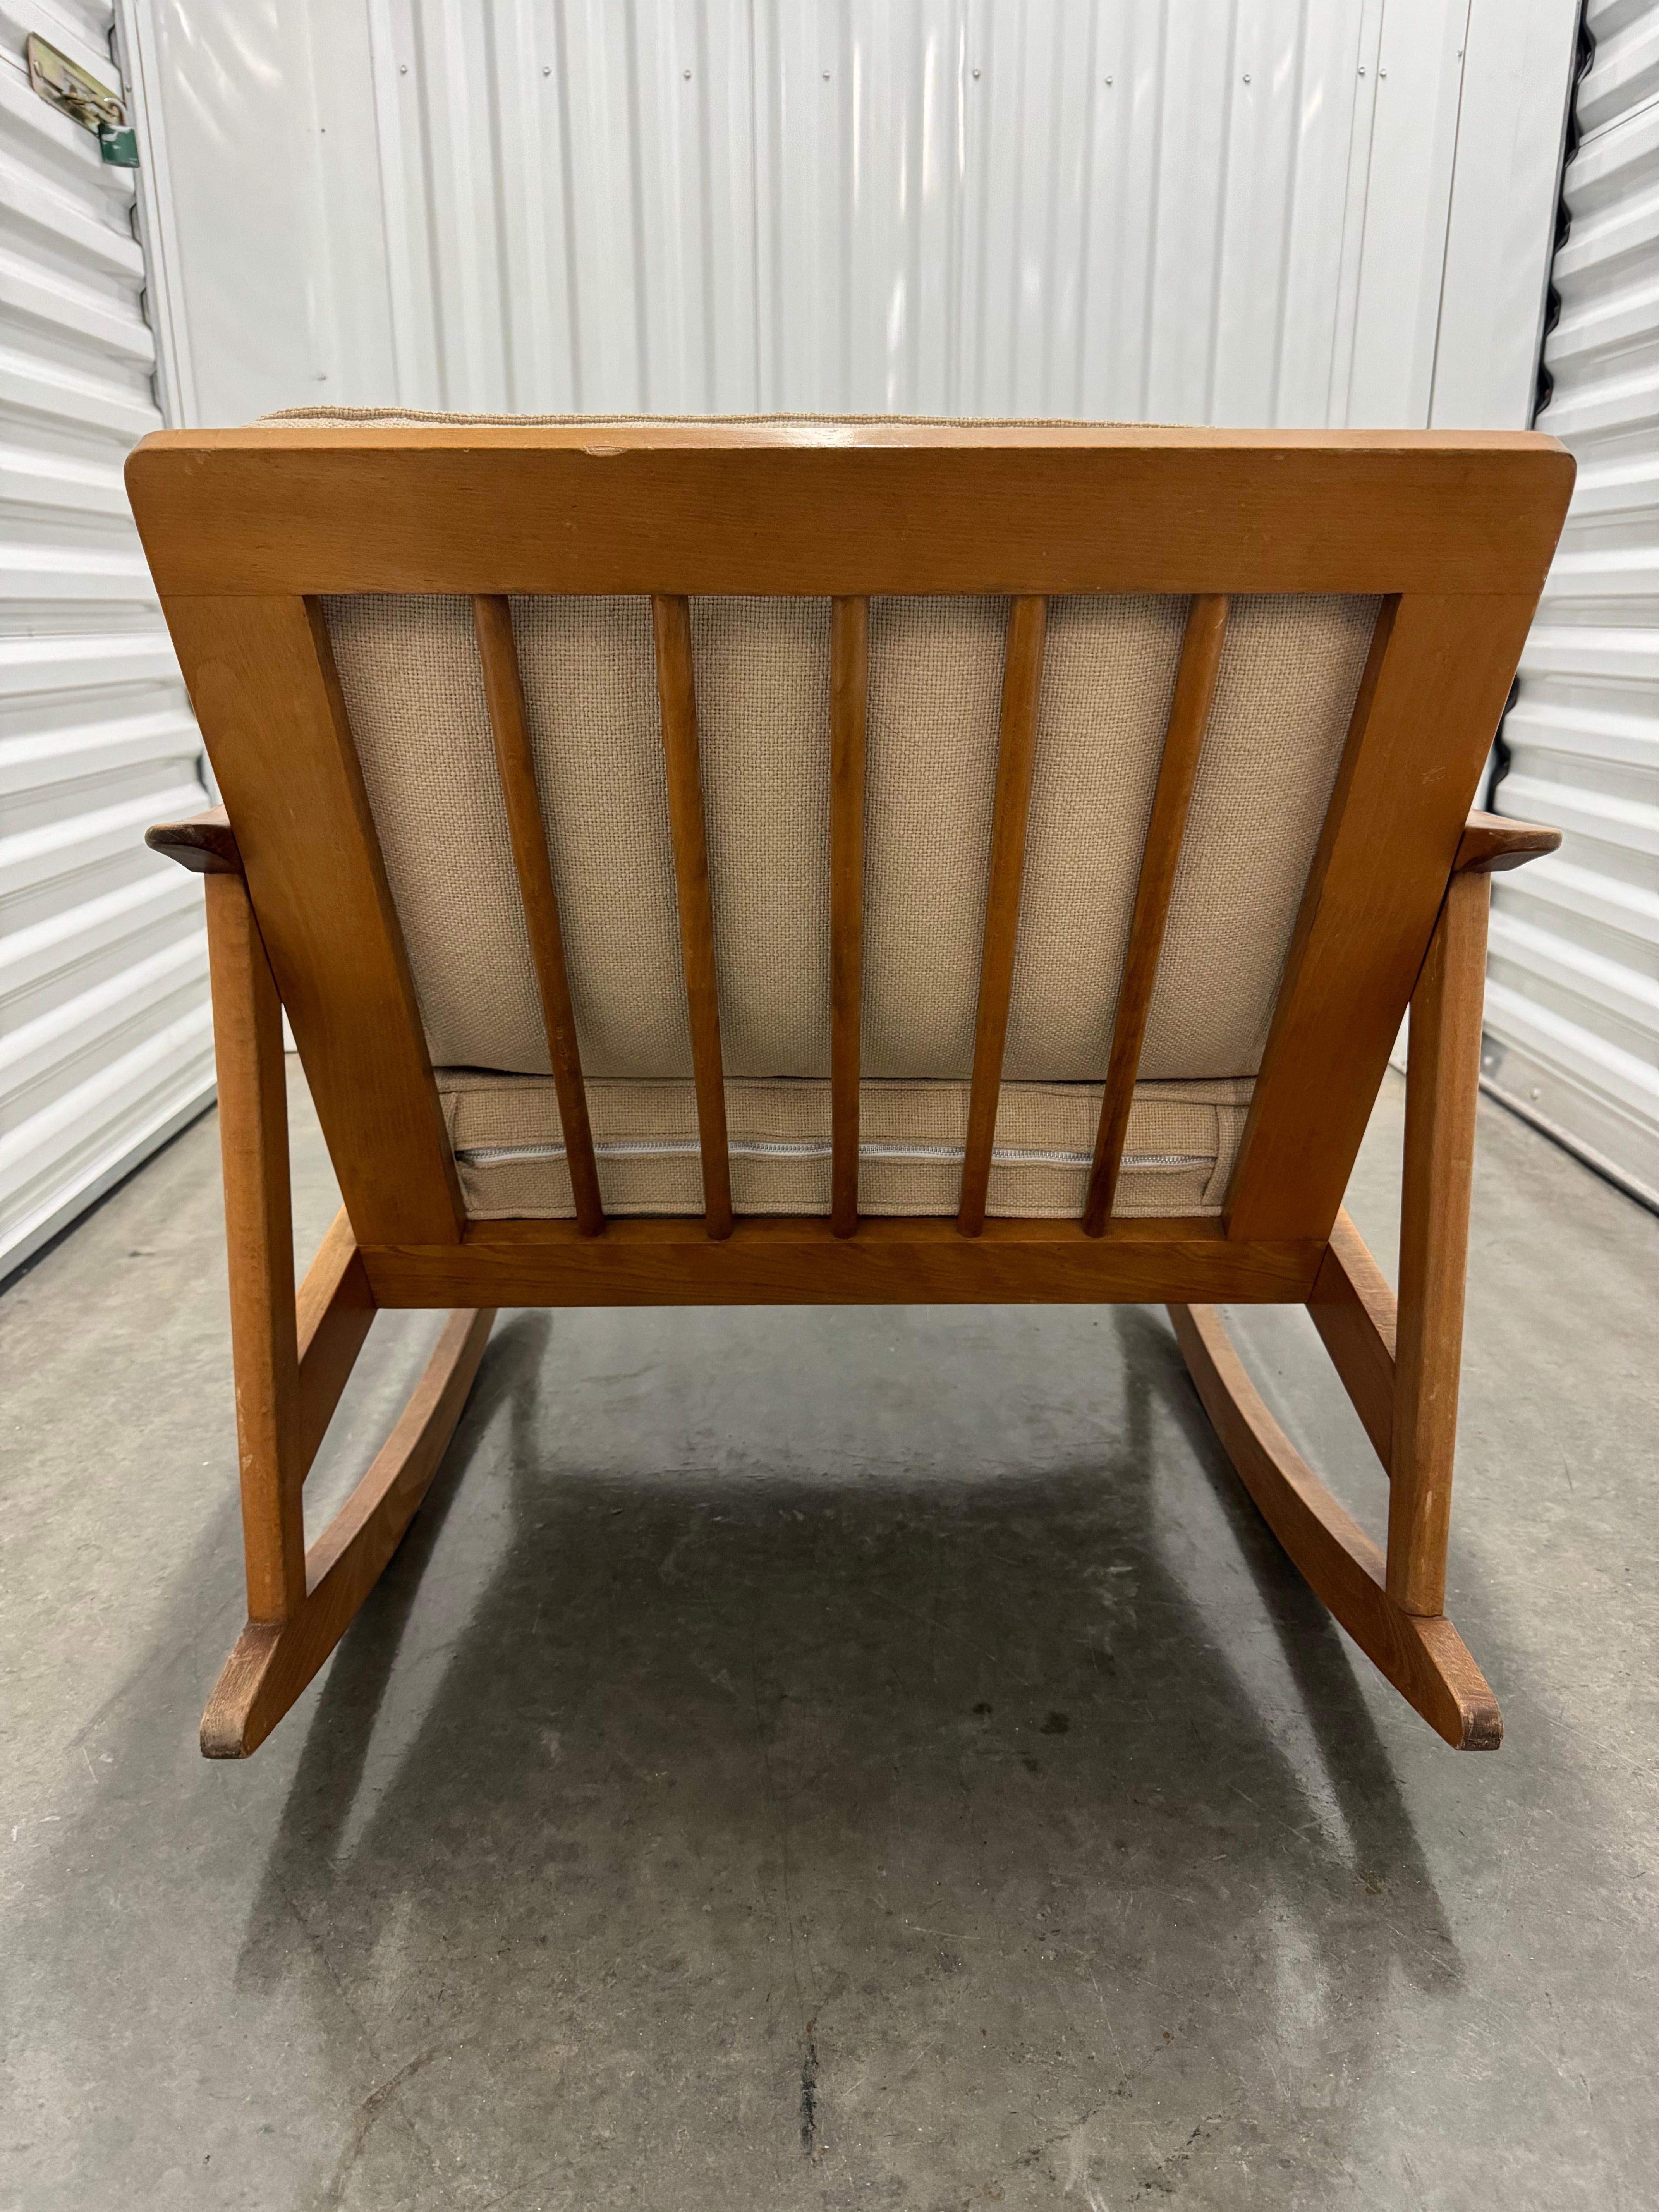 1960's Mid Century Modern Danish Style Rocking Arm Chair In Good Condition For Sale In San Carlos, CA